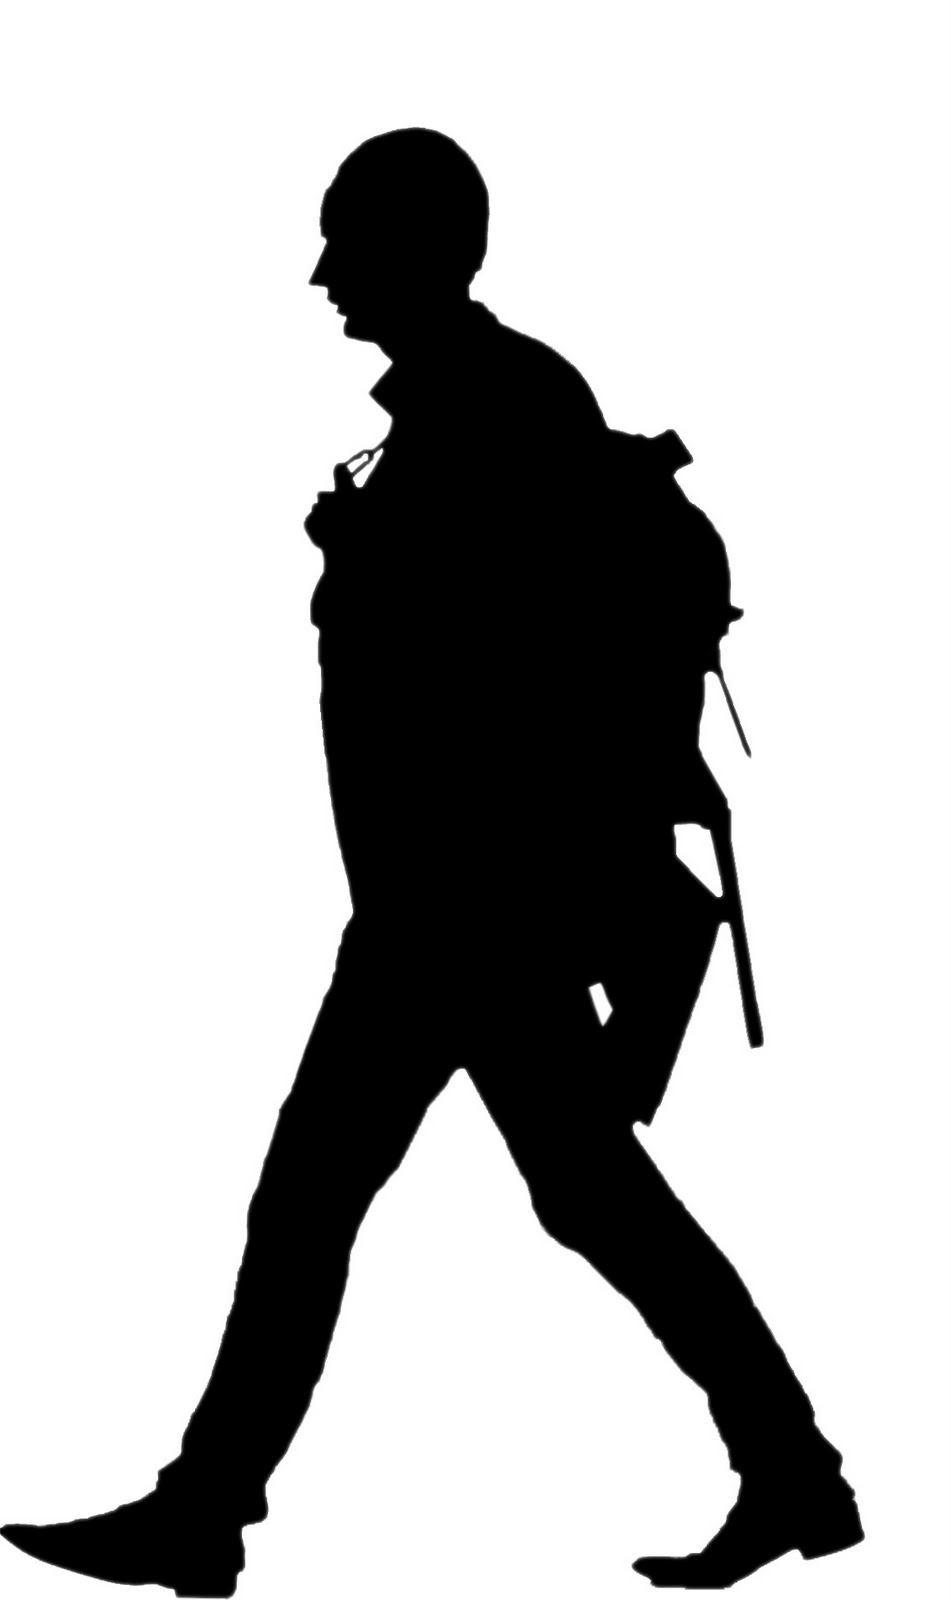 Walking Person Silhouette - ClipArt Best